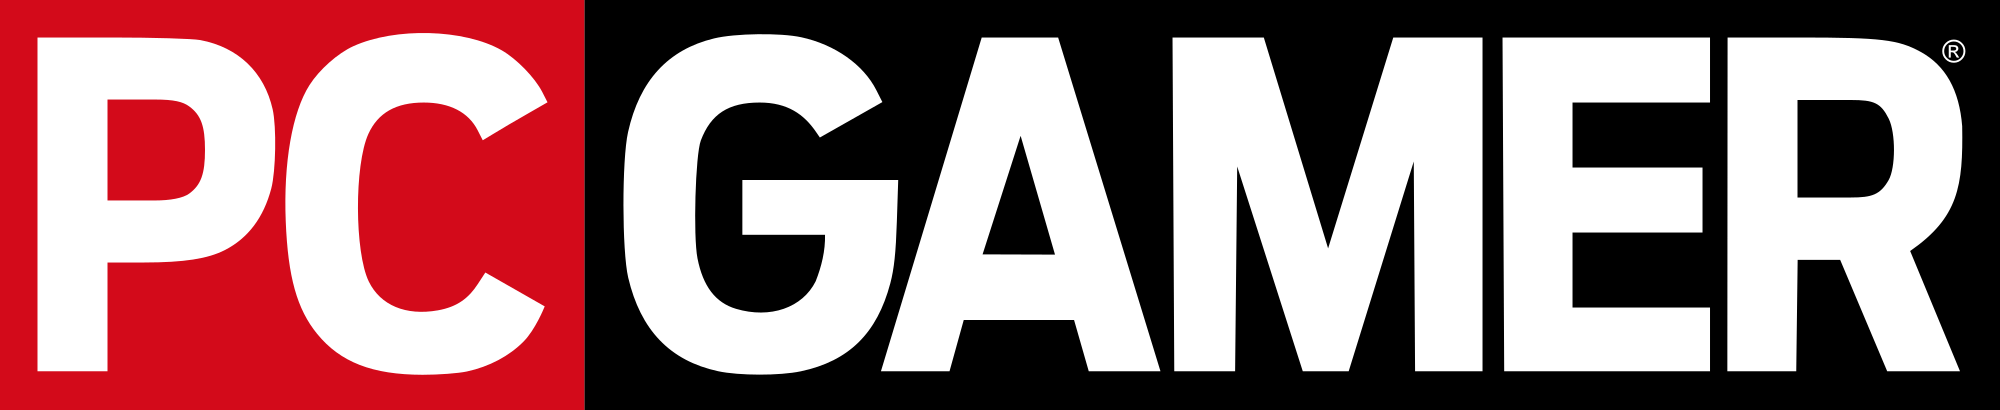 PC Gaming Logo - File:PC Gamer old logo.svg - Wikimedia Commons